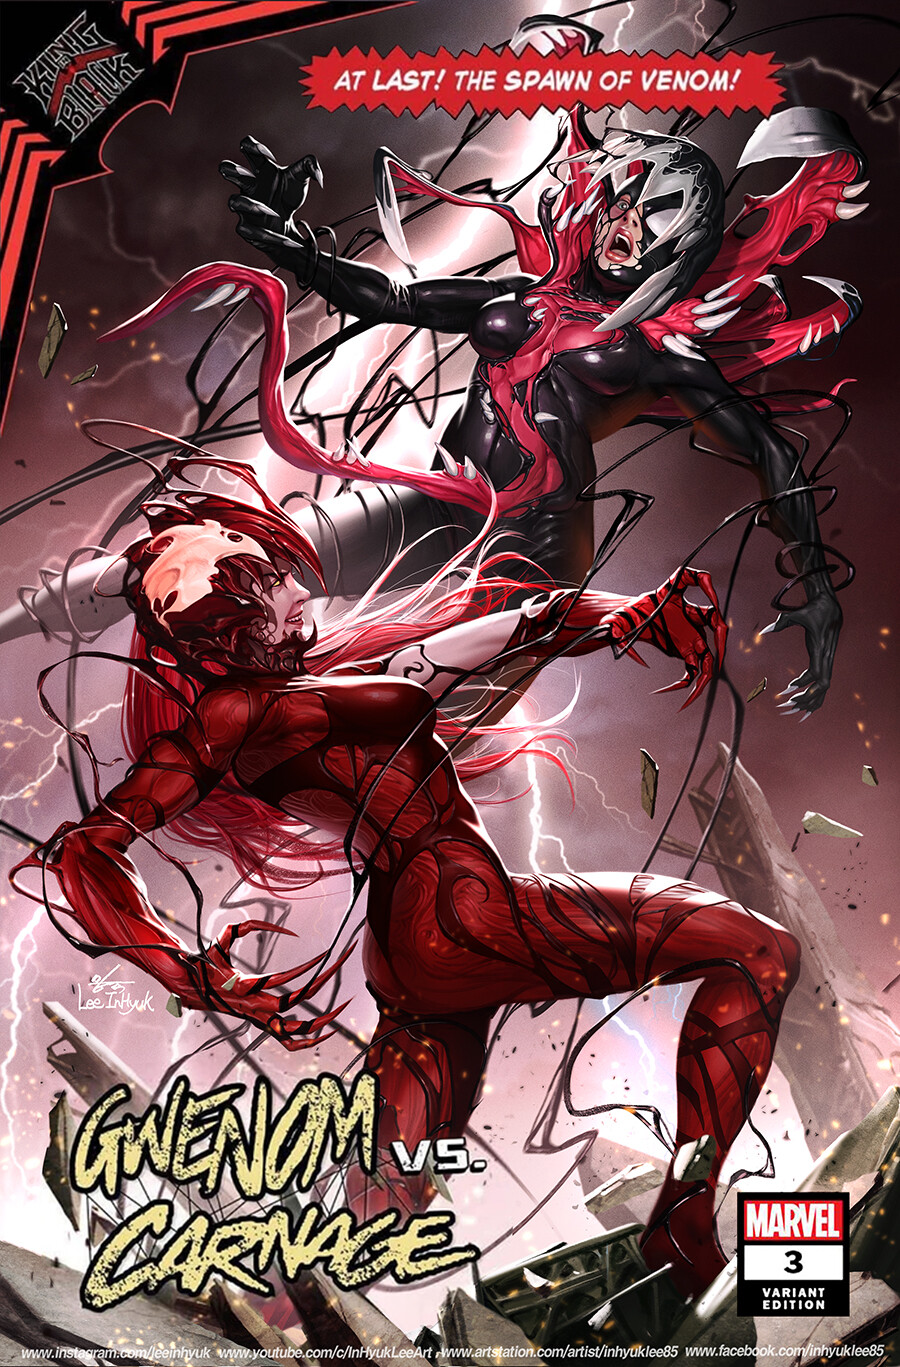 https://thecomicmint.com/products/gwenom-vs-carnage-3-inhyuk-lee-asm-361-homage-variant